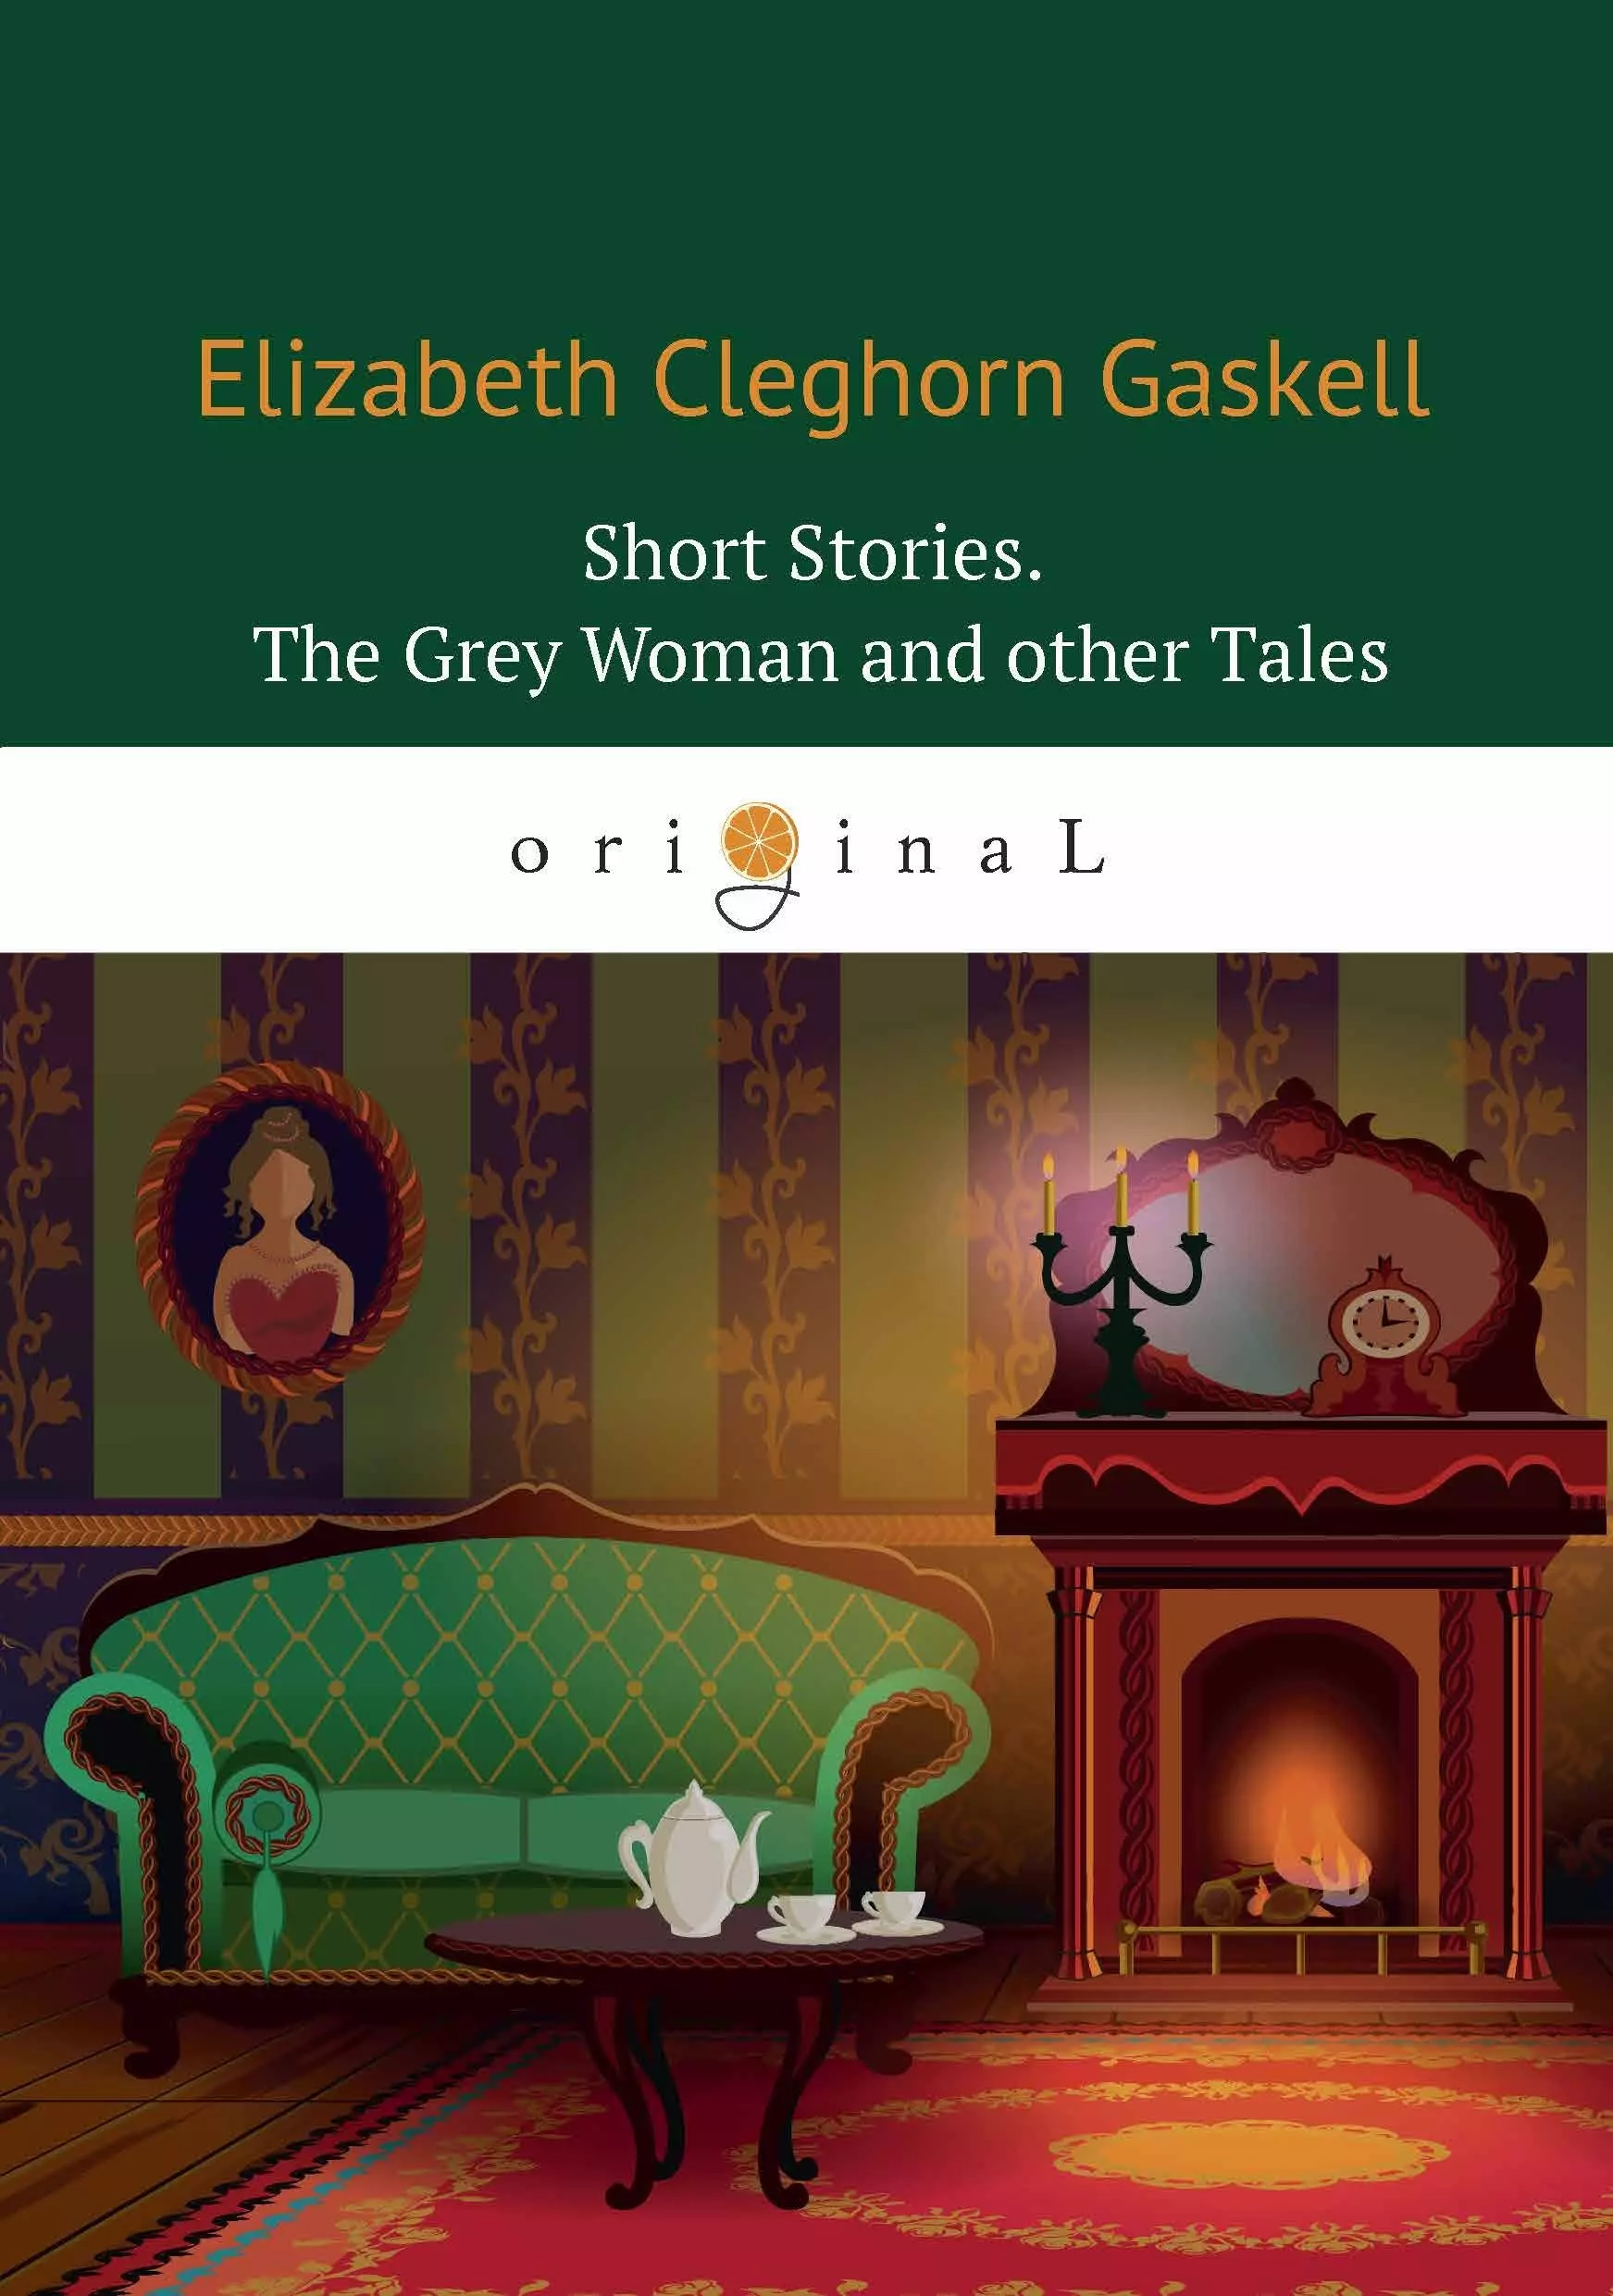 Гаскелл Элизабет - Short Stories. The Grey Woman and other Tales